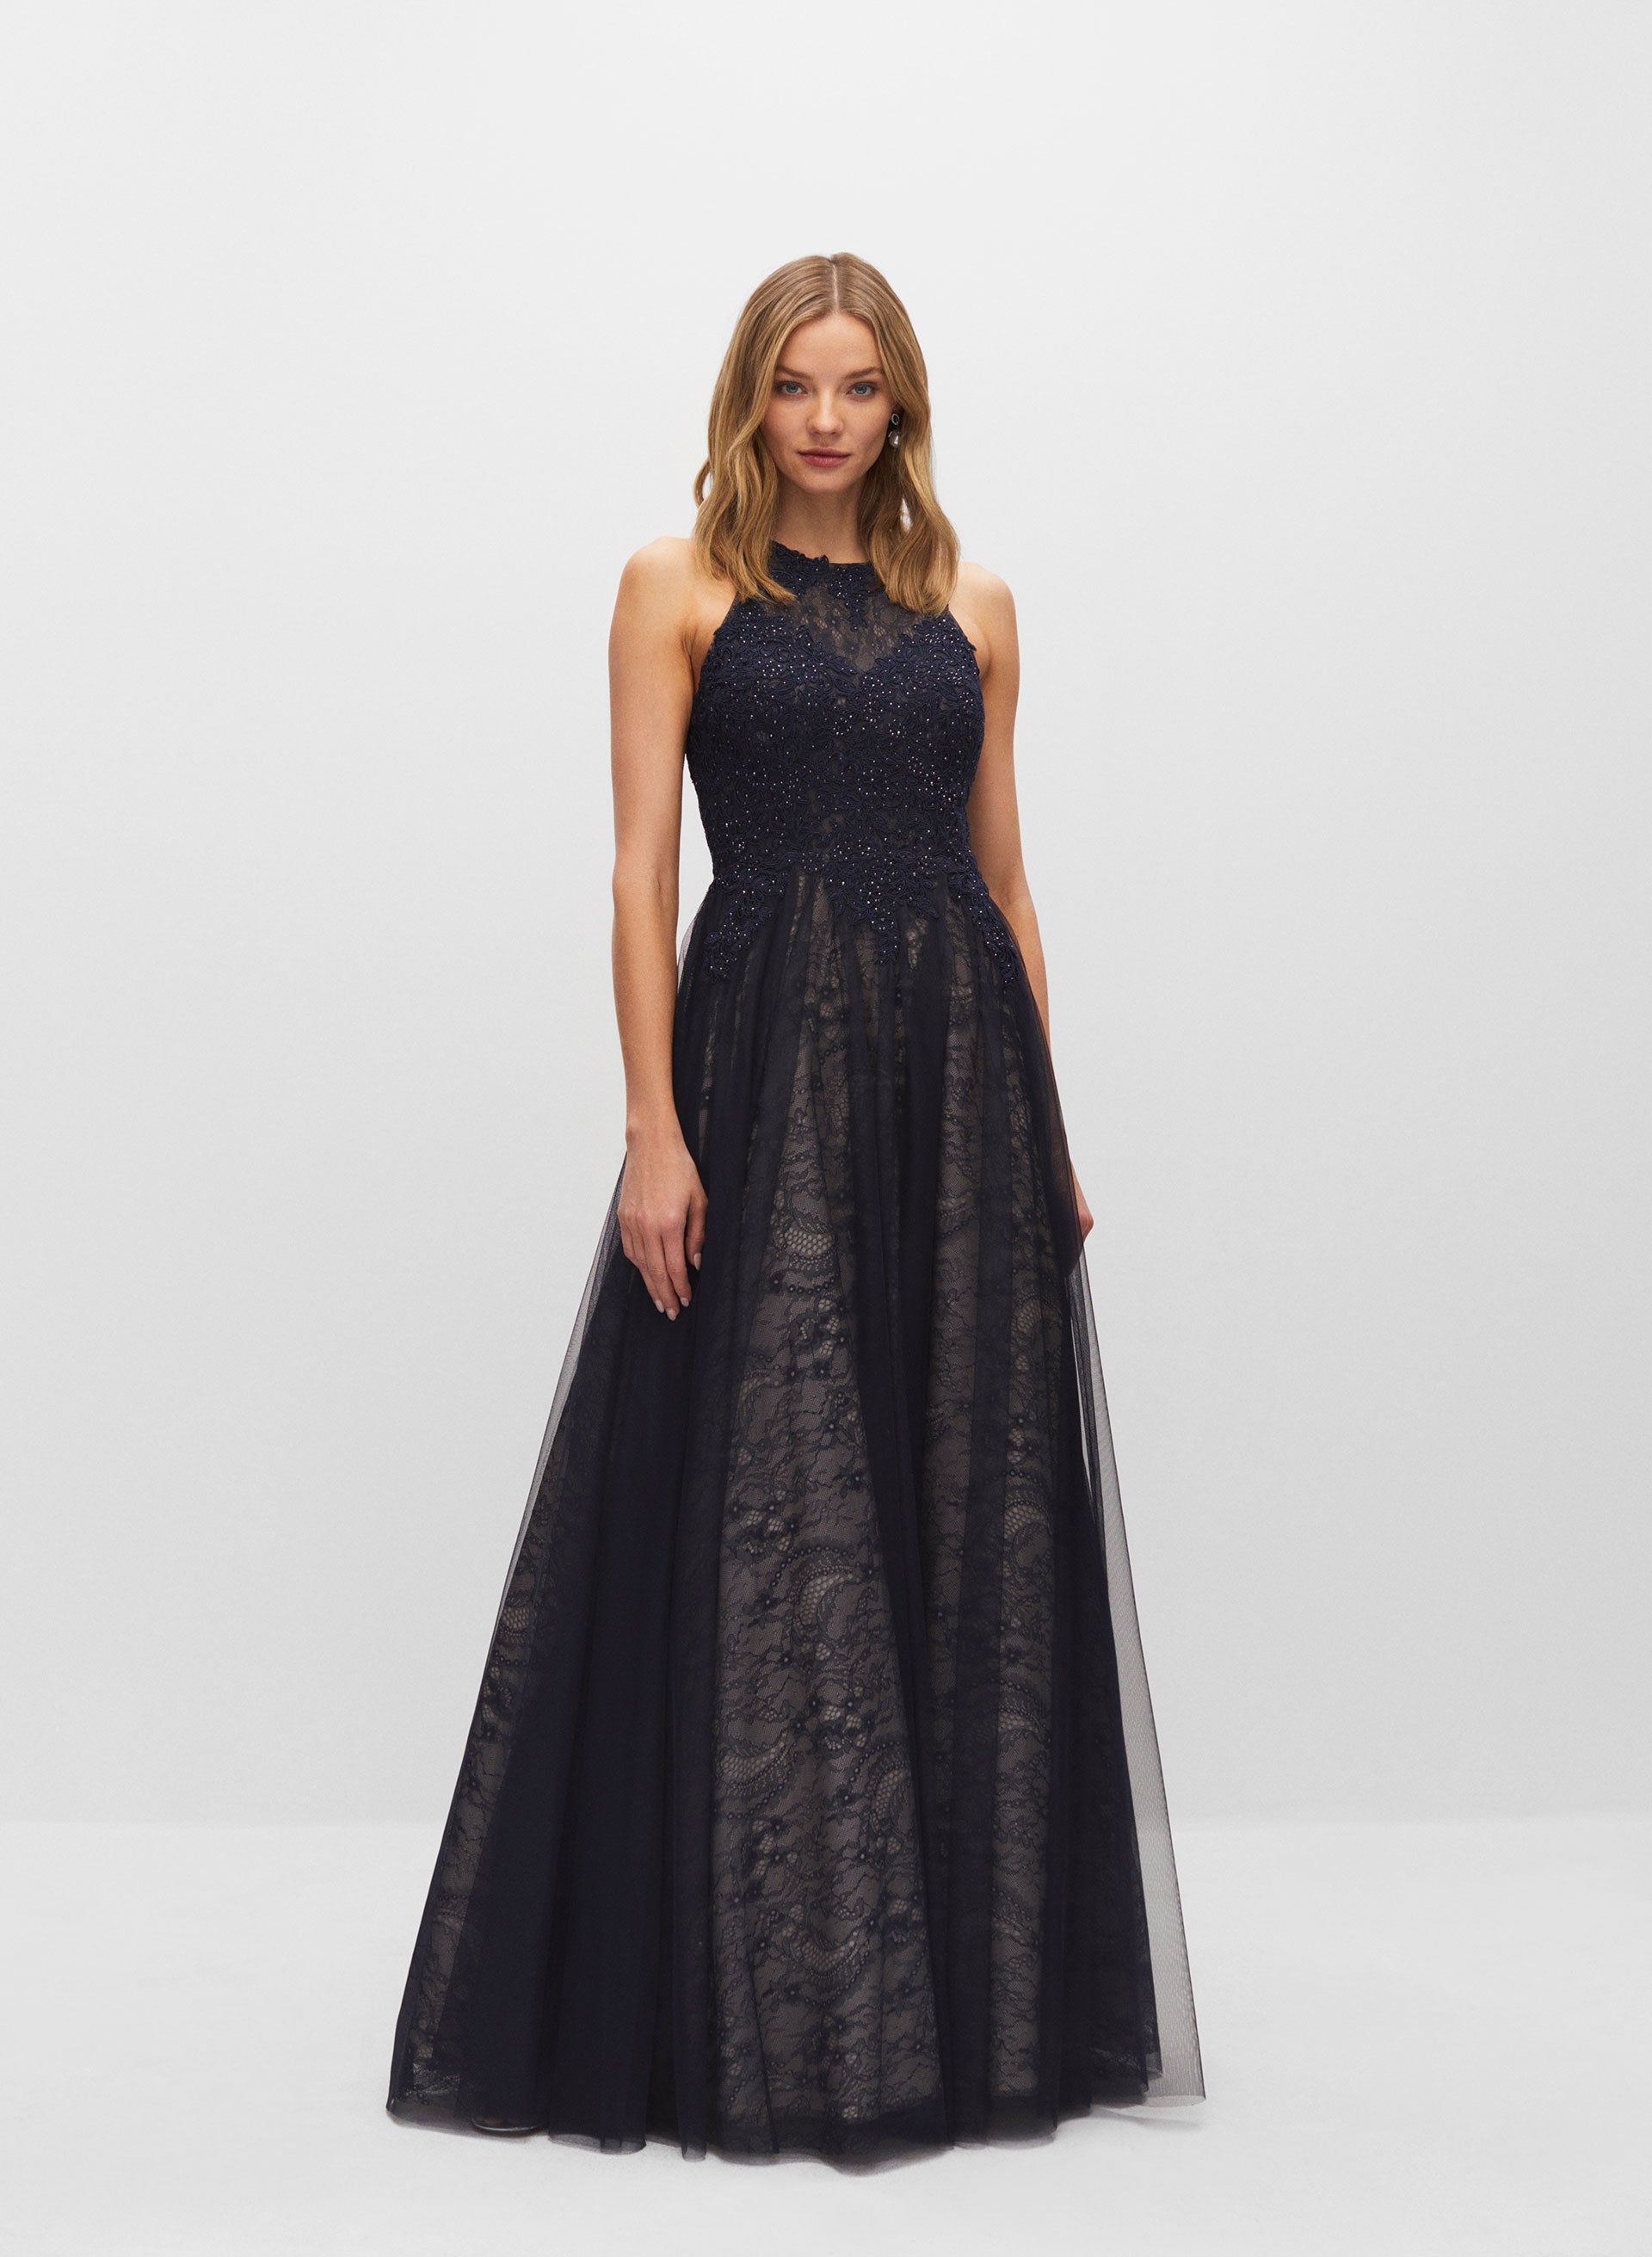 Embellished & Embroidered Lace Gown